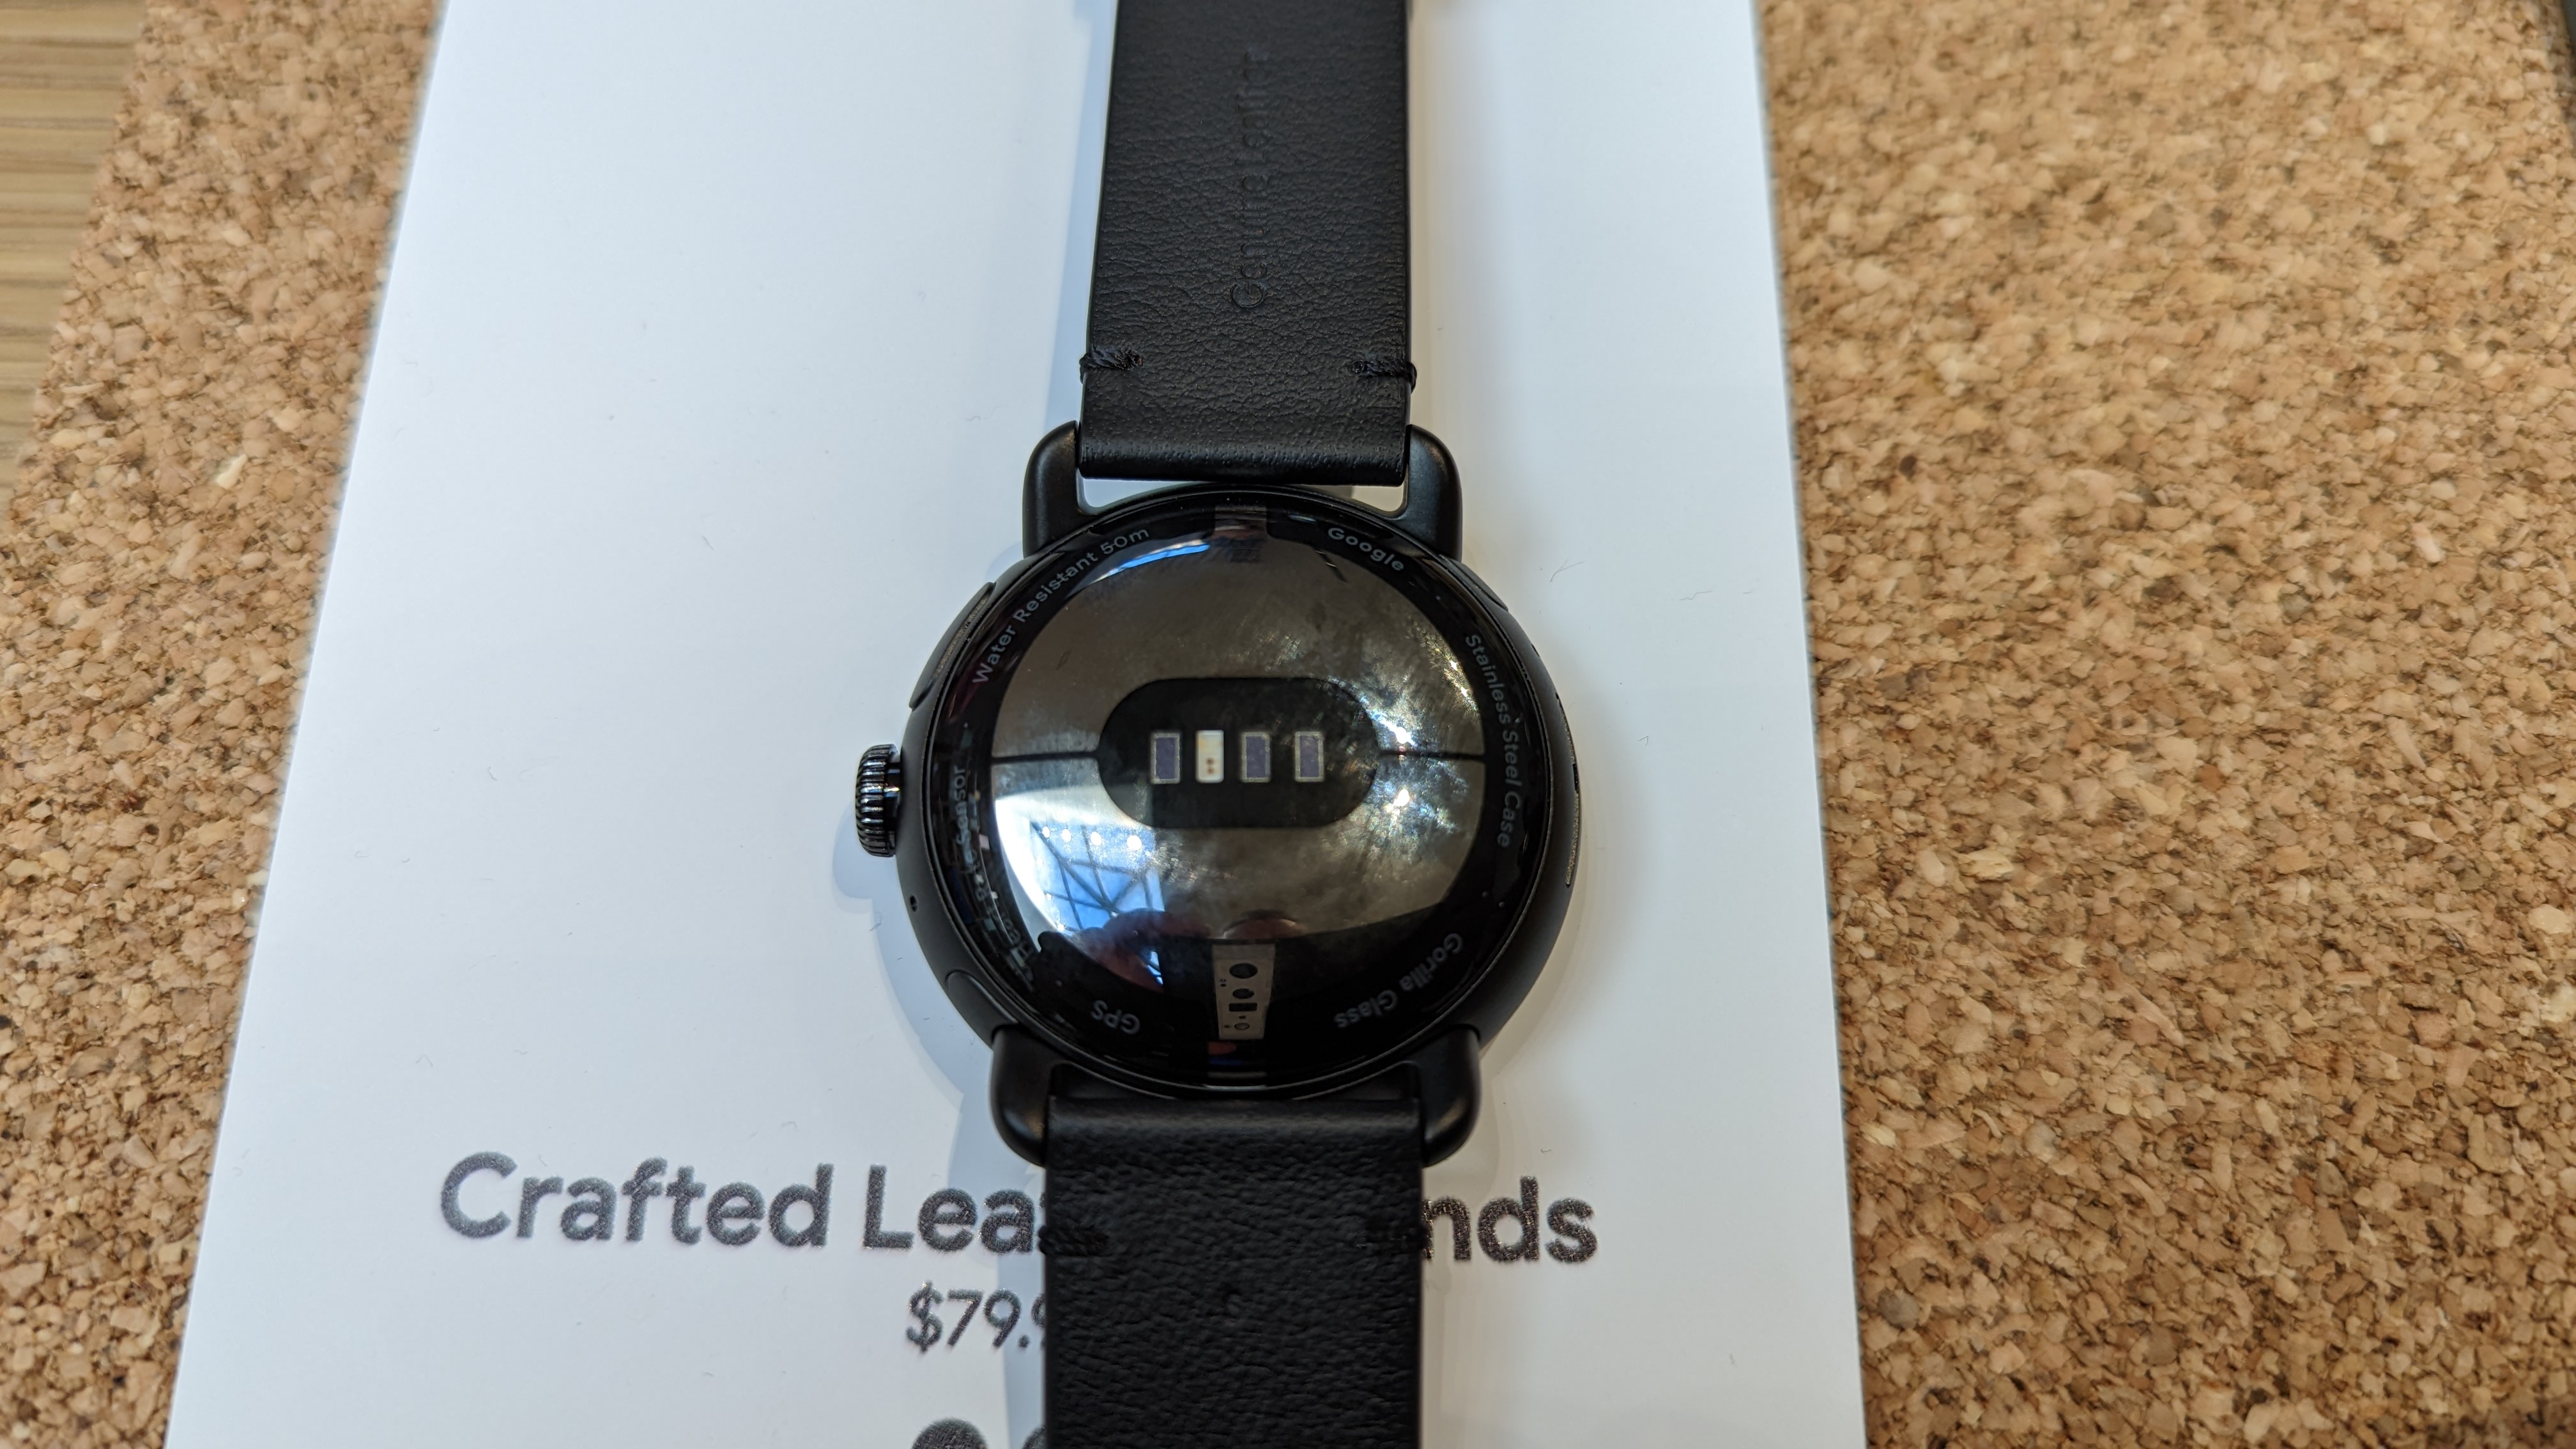 Health sensors on the Google Pixel Watch at the hands-on event